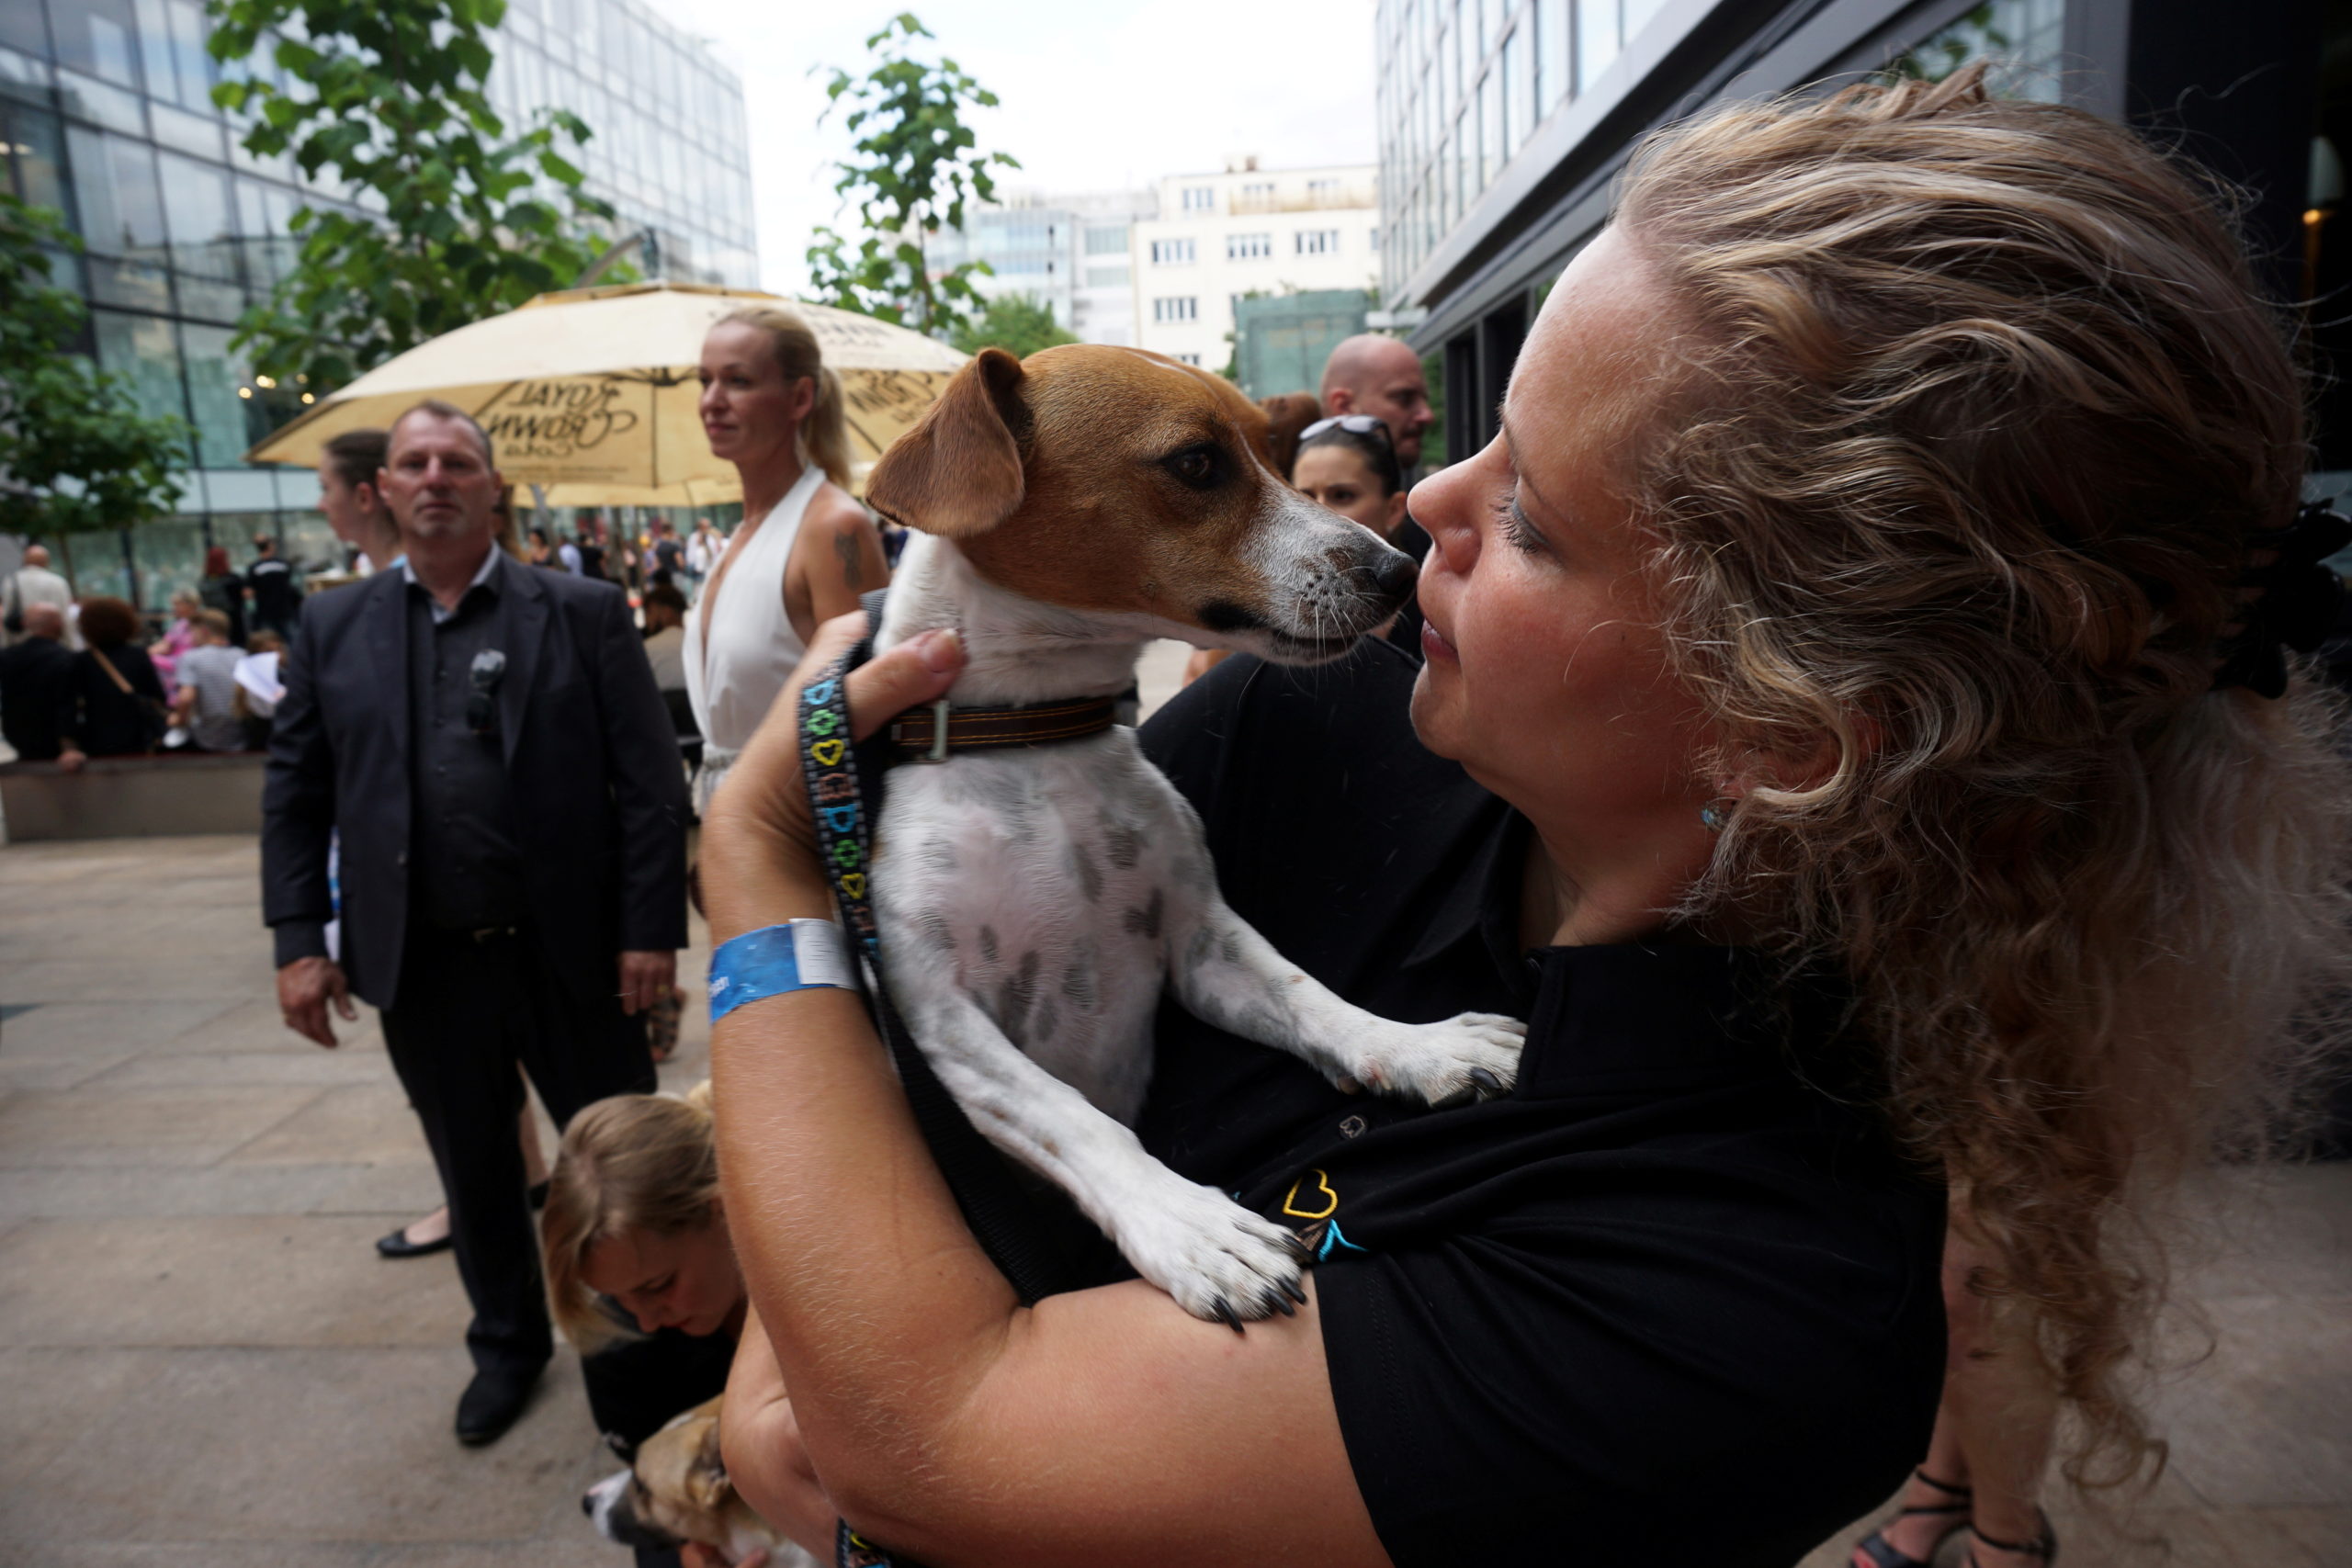 A dog keeper holds a dog actor before "Gump" premiere in Prague, Czech Republic July 21, 2021. Picture taken July 21, 2021.